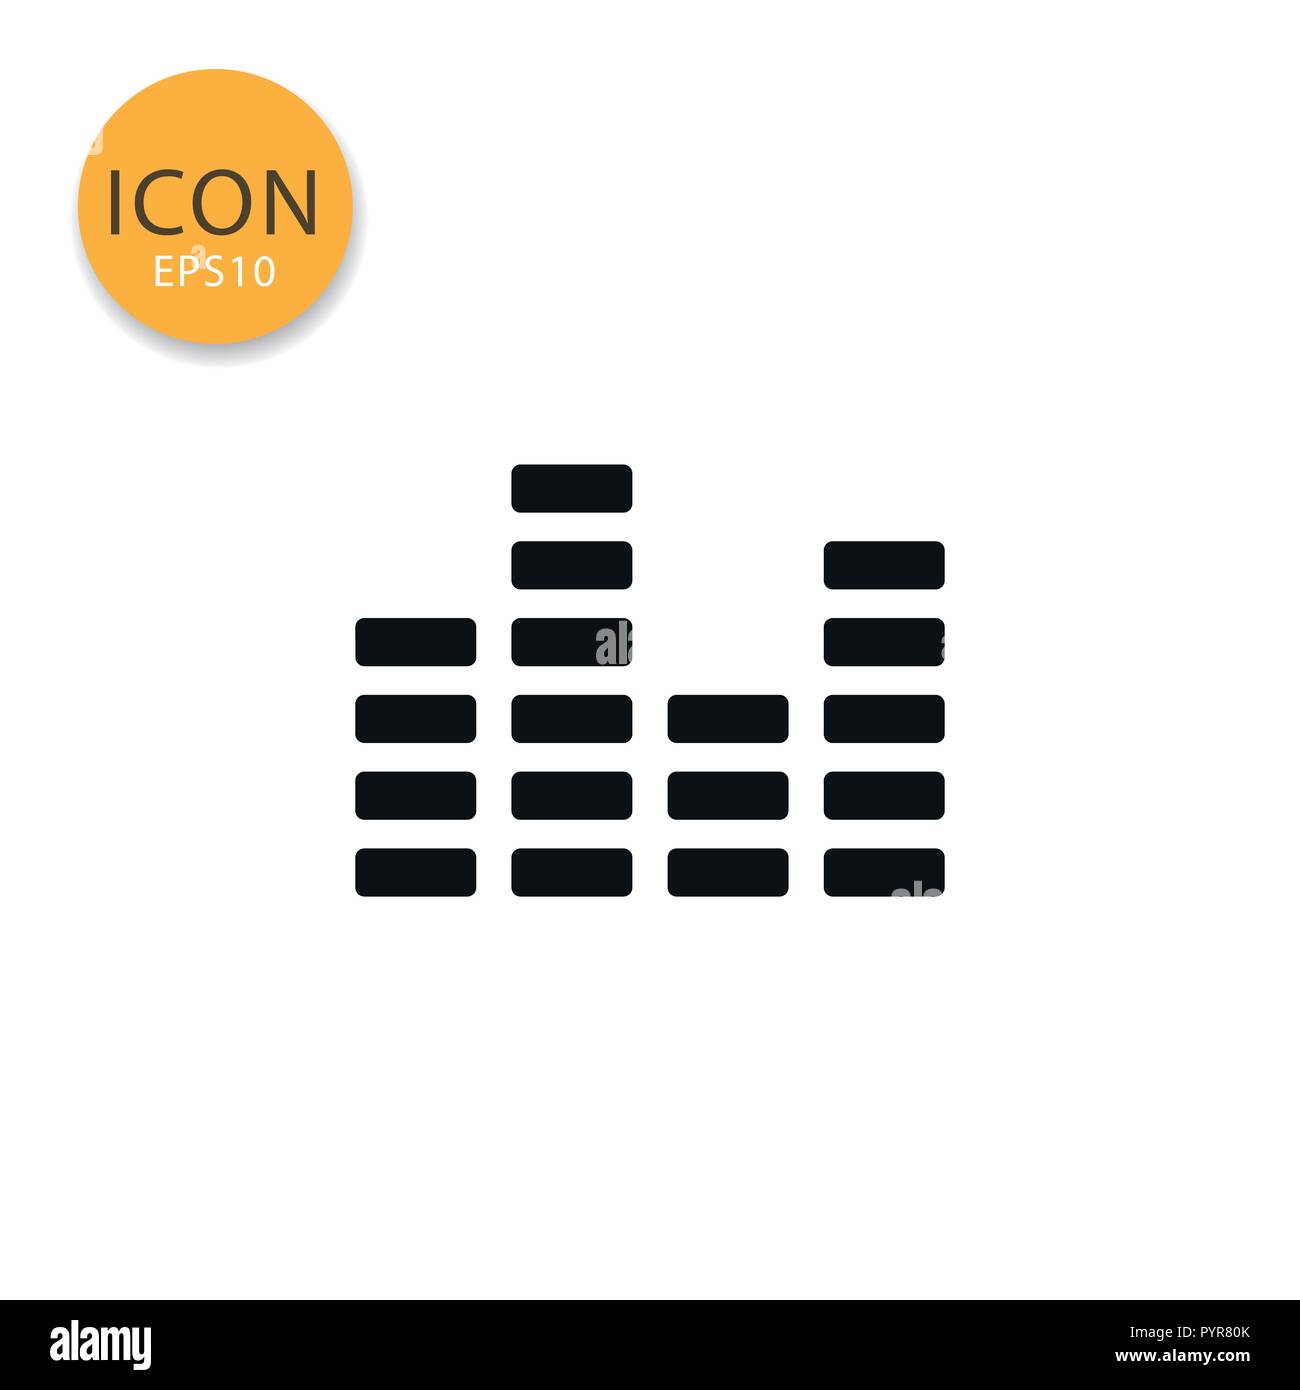 Equalizer music icon flat style in black color vector illustration on white background. Stock Vector